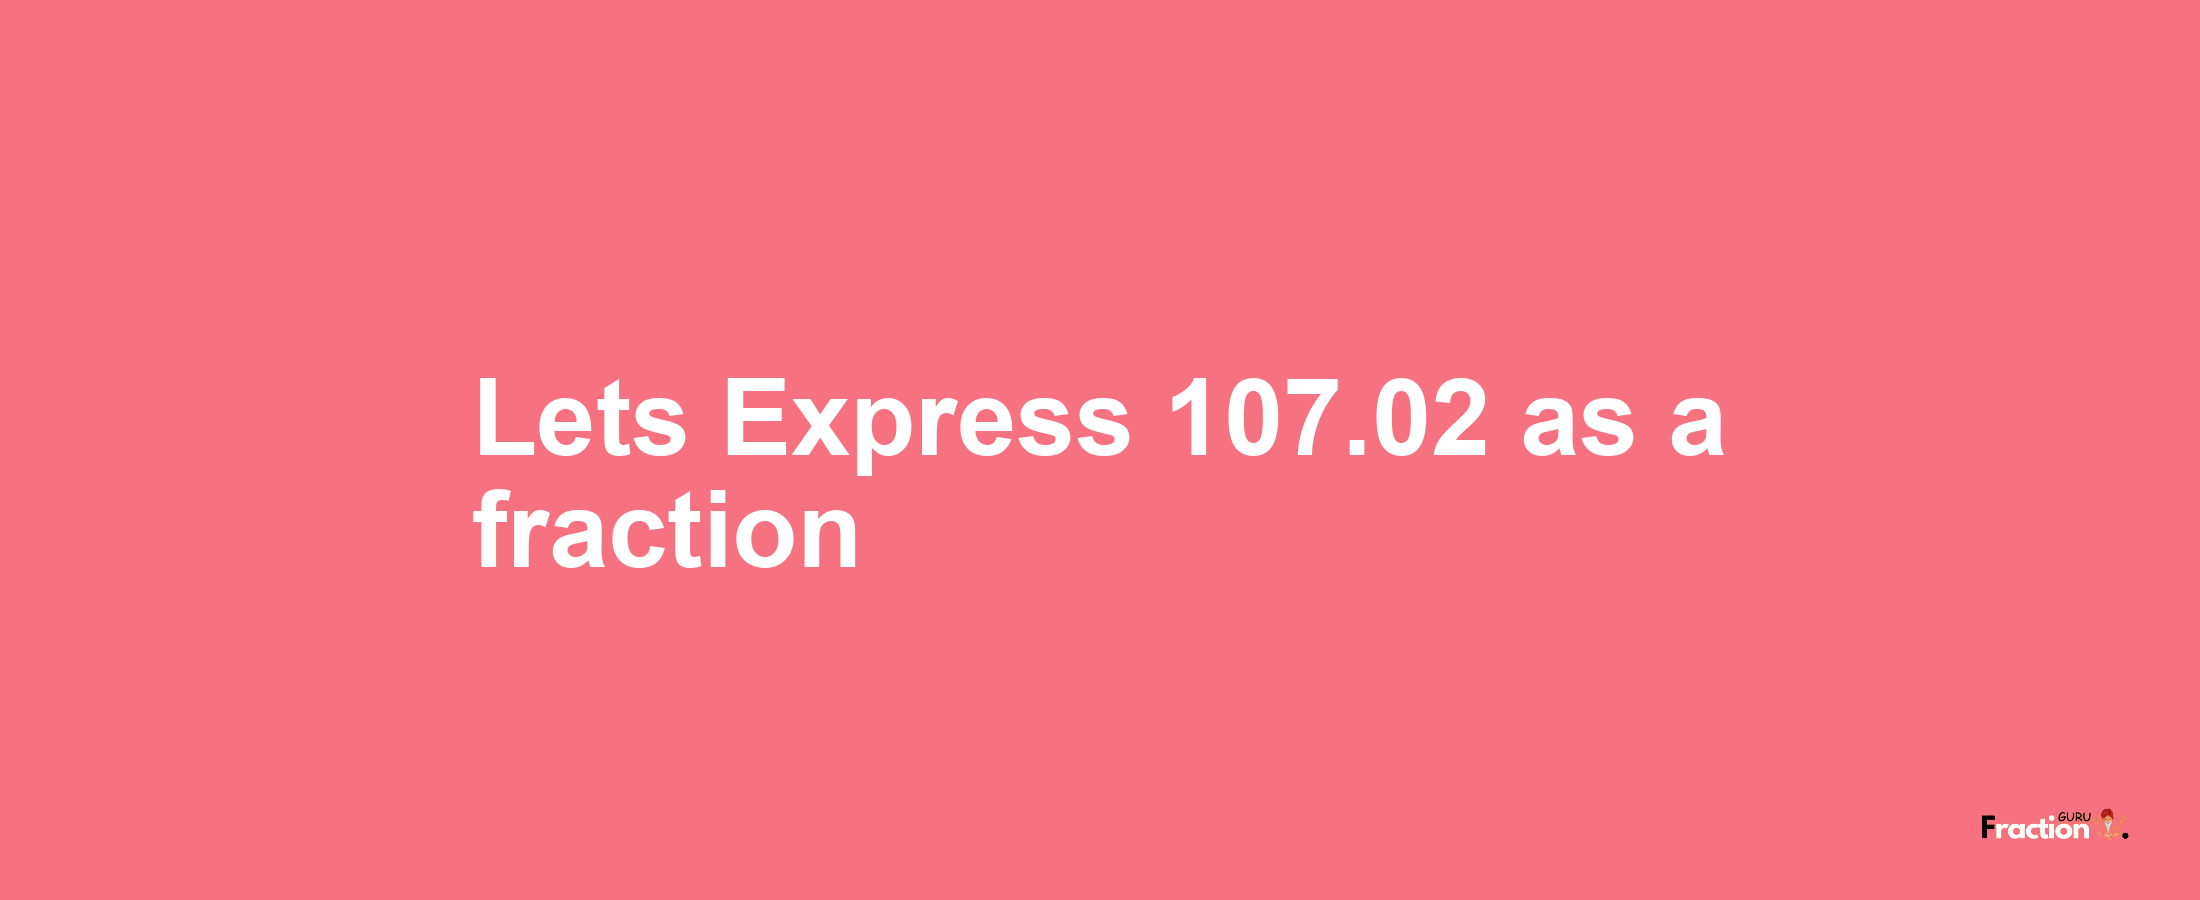 Lets Express 107.02 as afraction